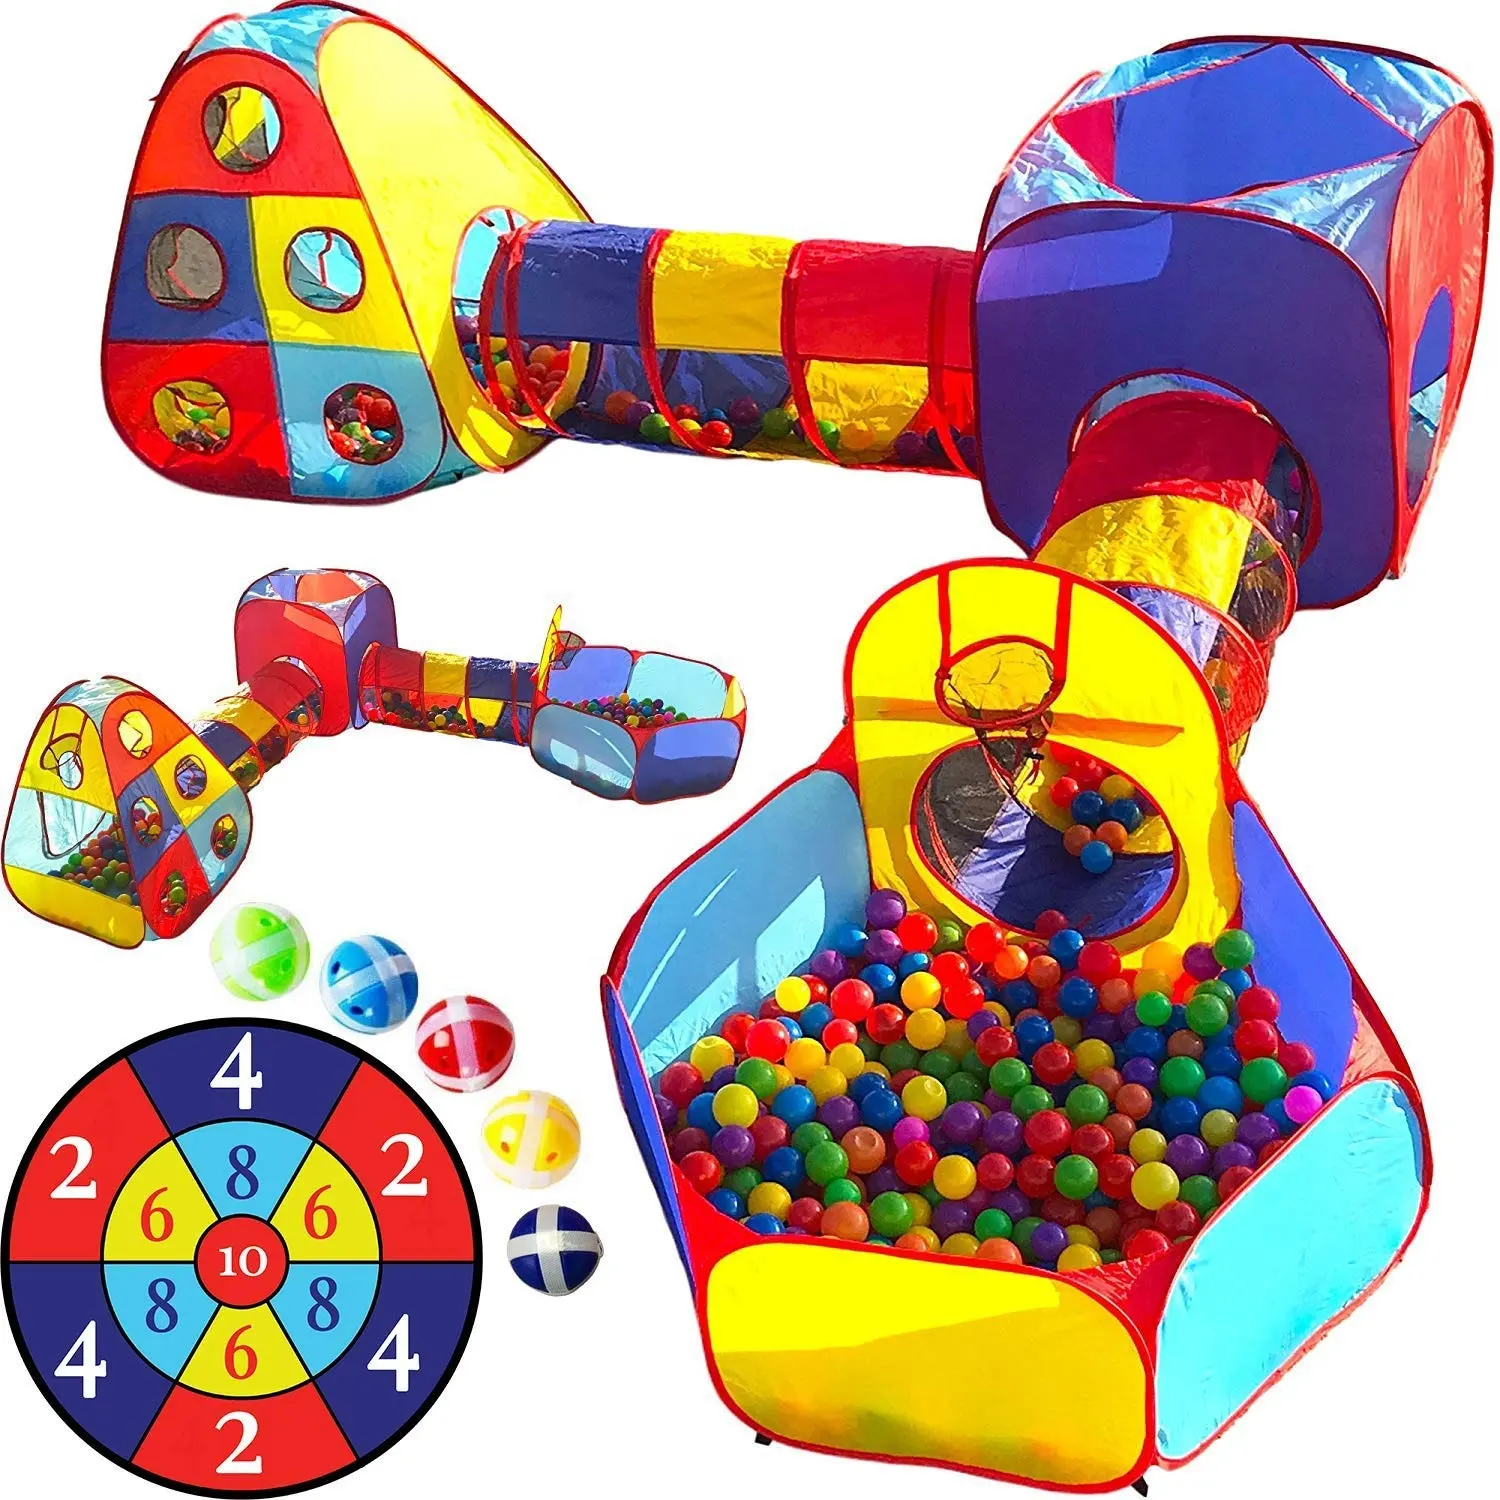 5pc Kids Ball Pit Tents and Tunnels, Toddler Jungle Gym Play Tent with Play Crawl Tunnel Toy